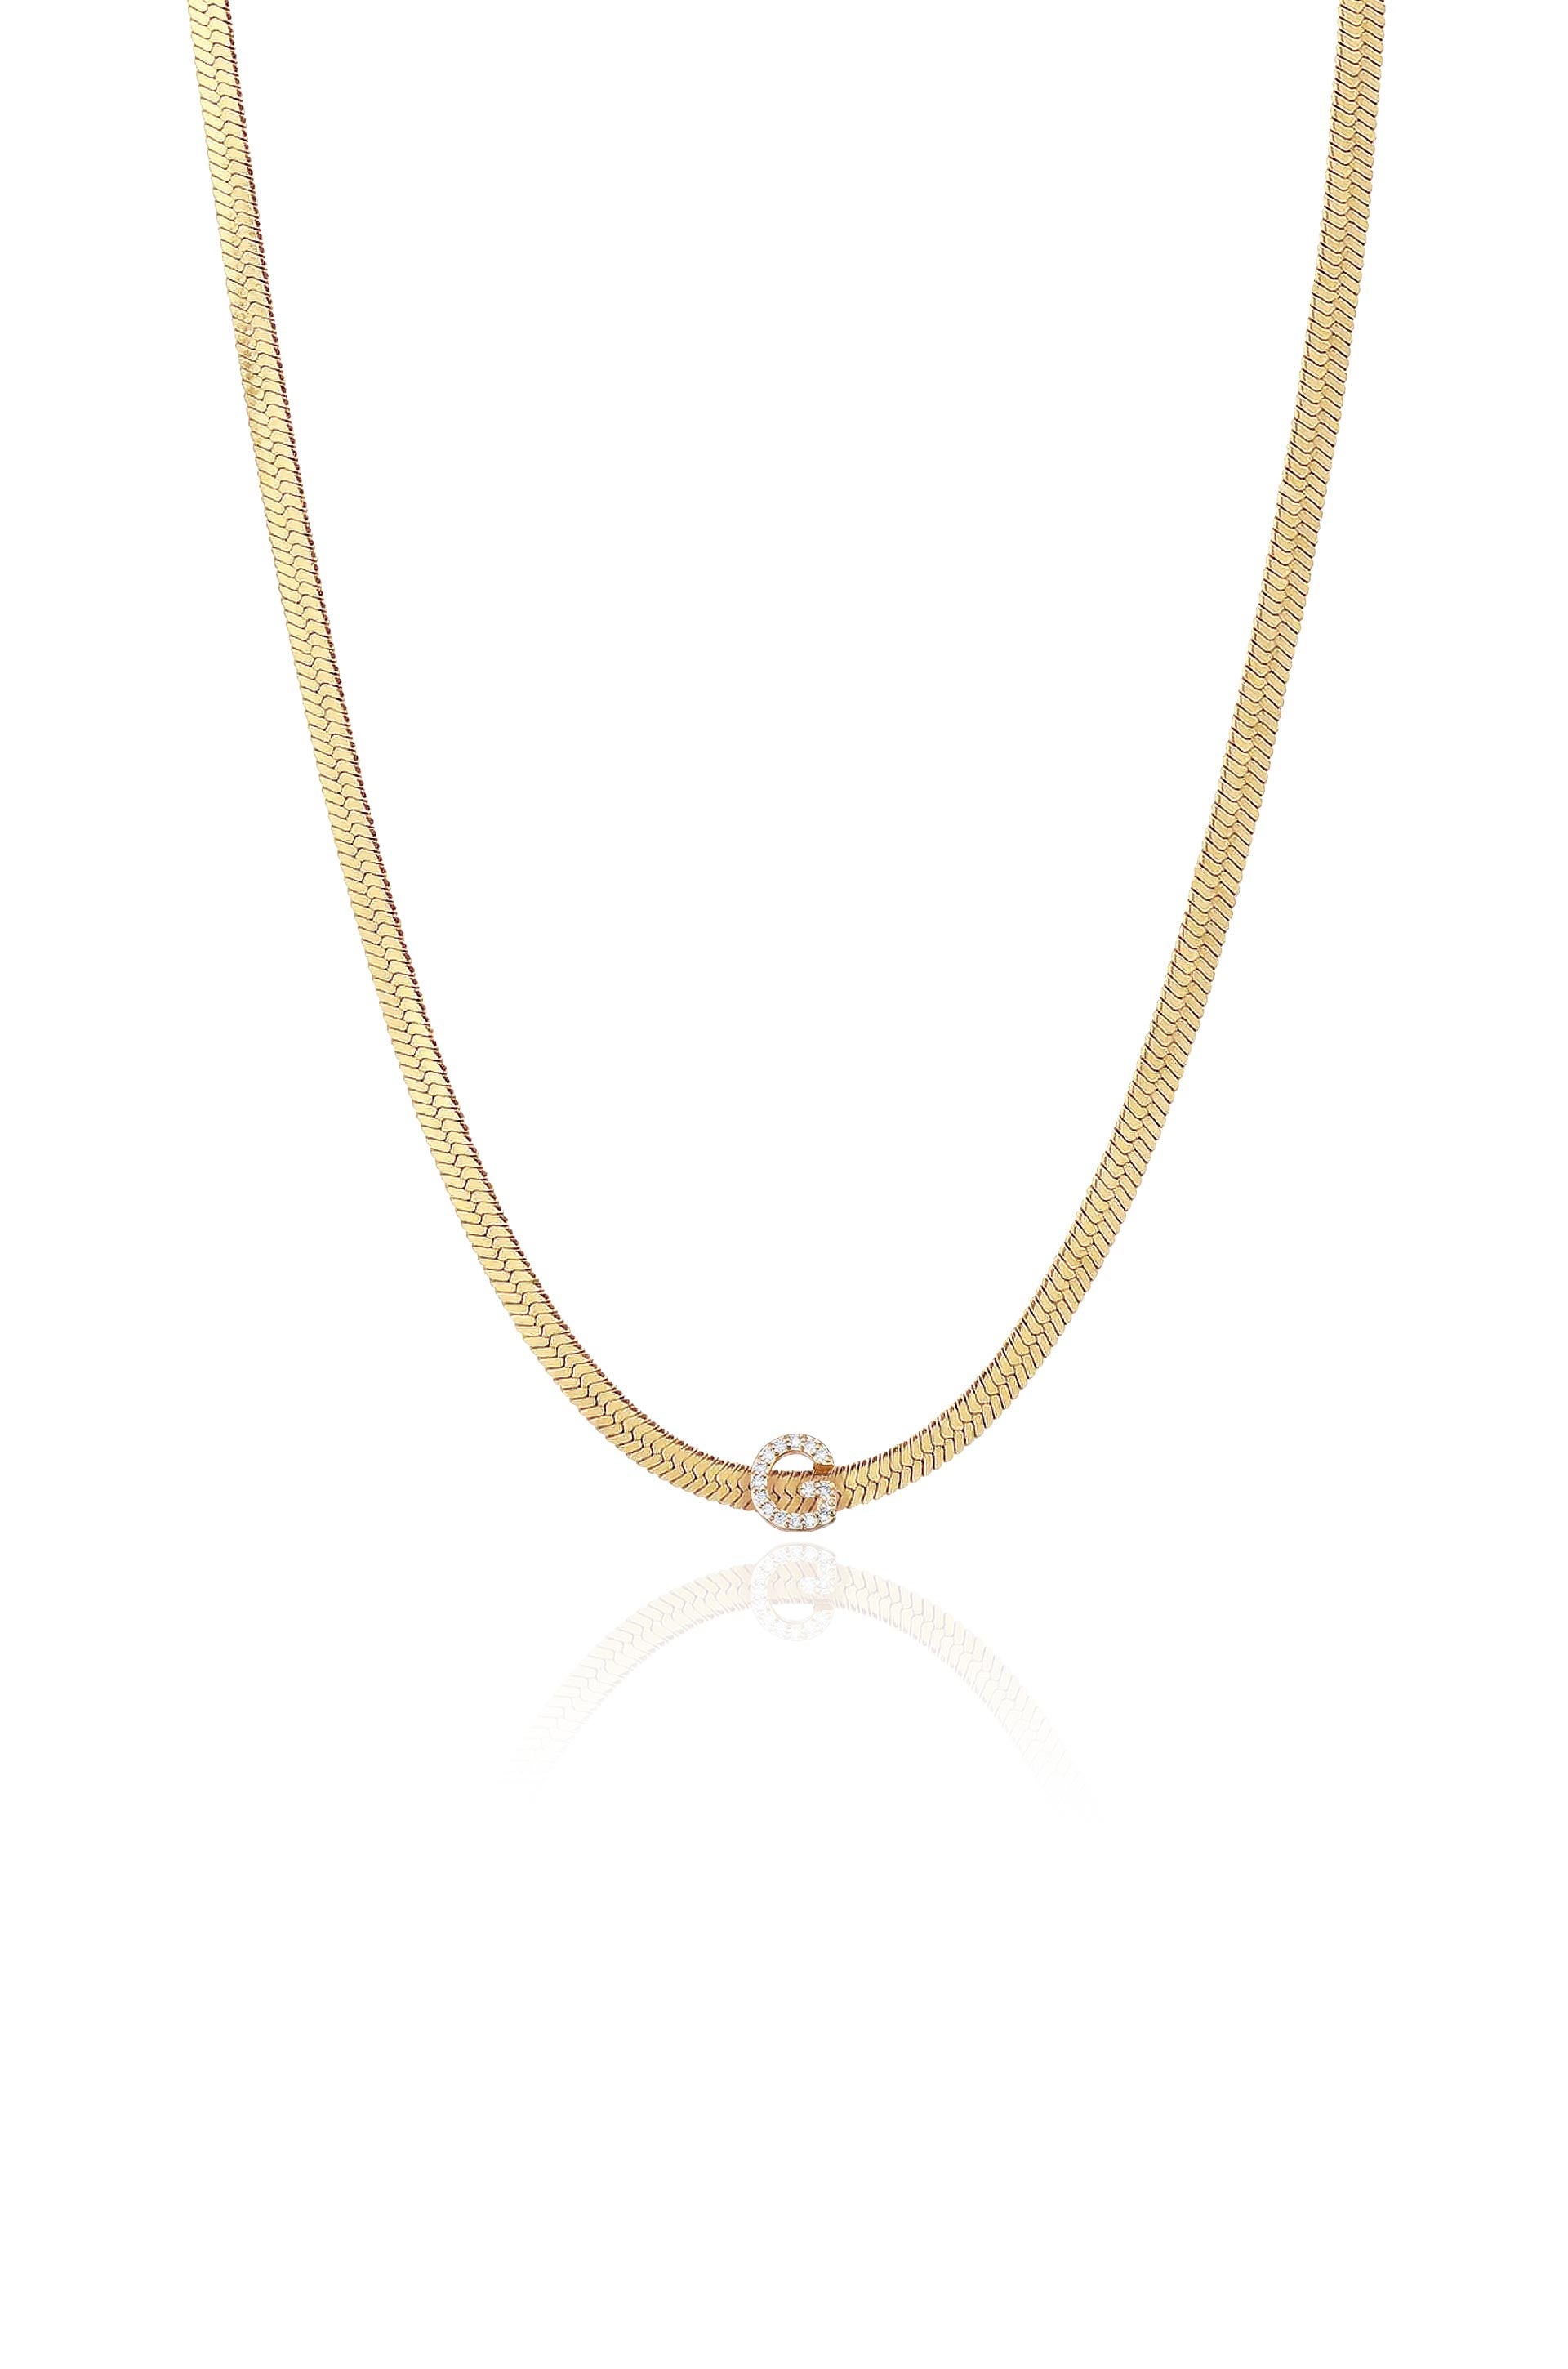 Initial Herringbone 18k Gold Plated Necklace - G